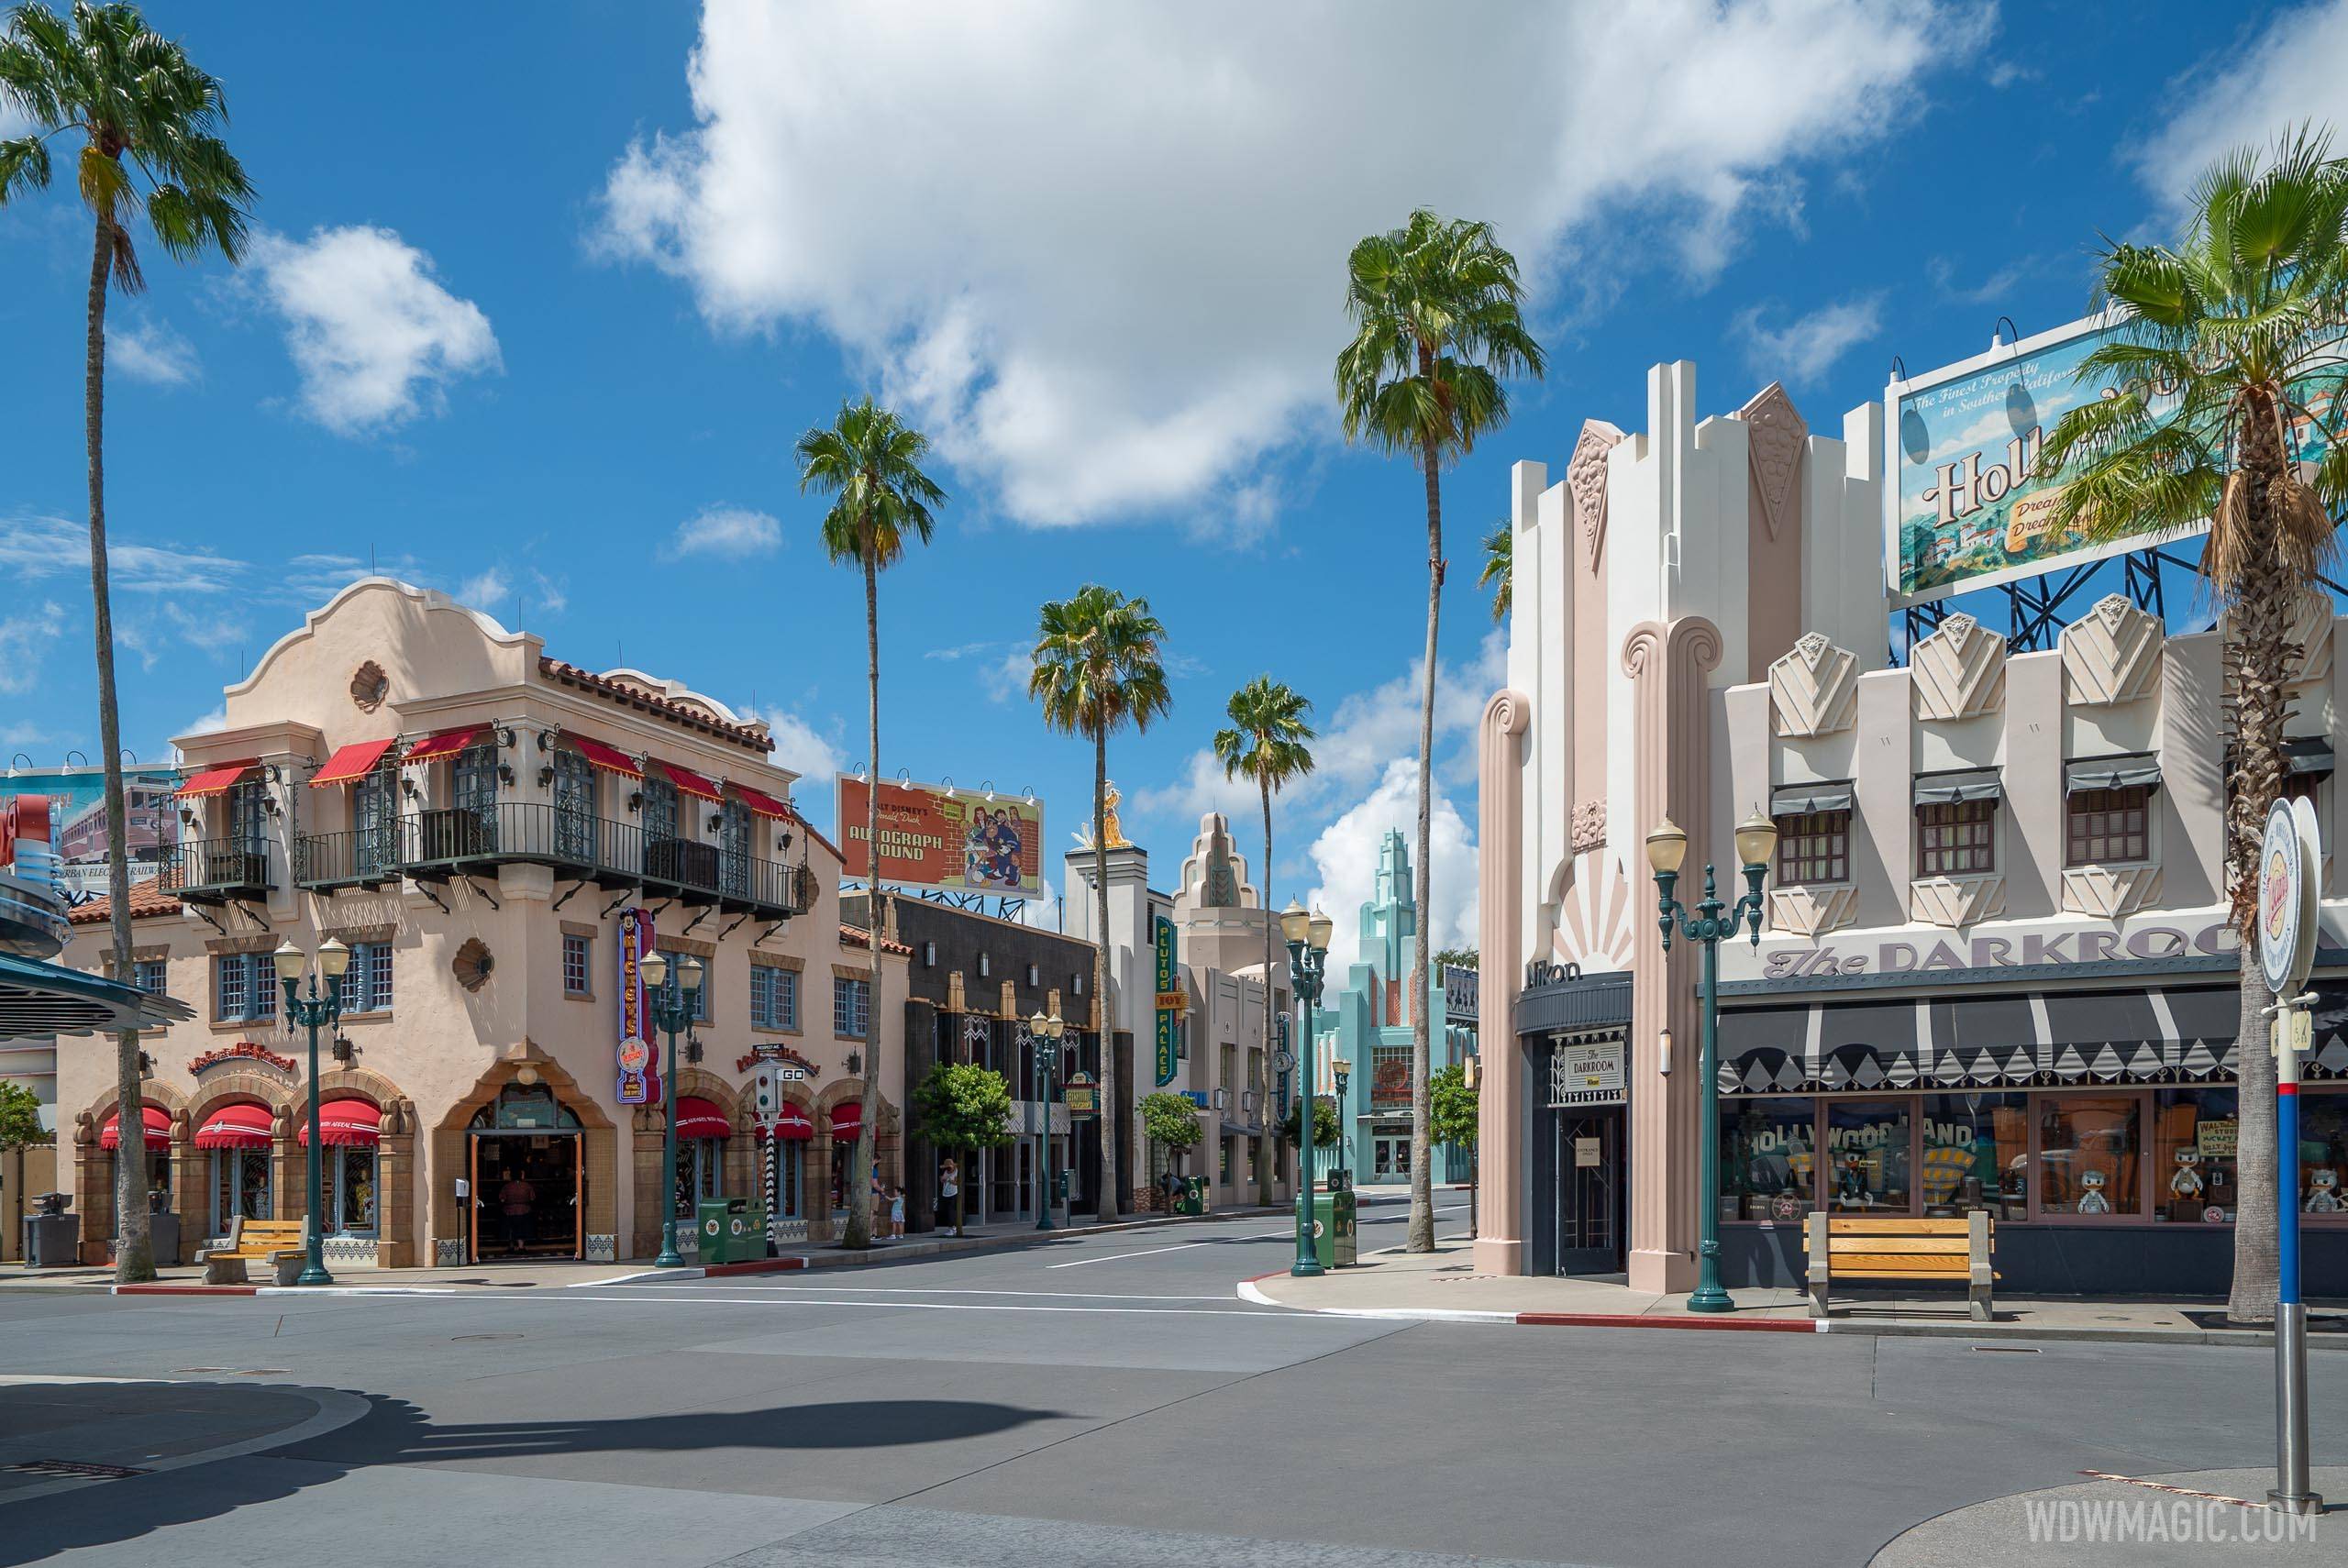 Three Moonlight Magic After Hours nights were planned for 2020 at Disney's Hollywood Studios